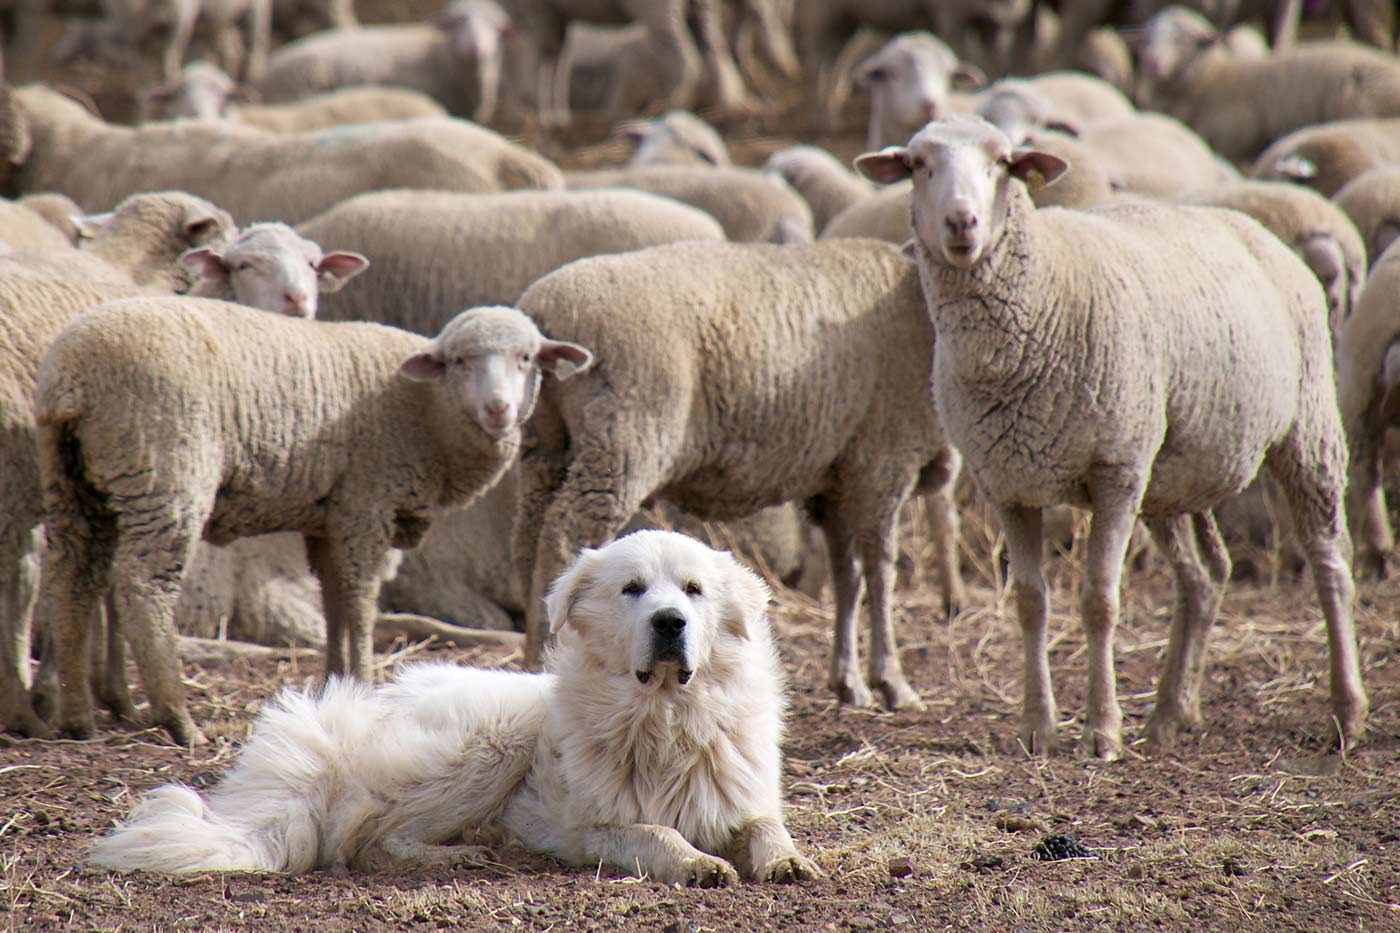 Great Pyrenees sheep dog guarding the flock.